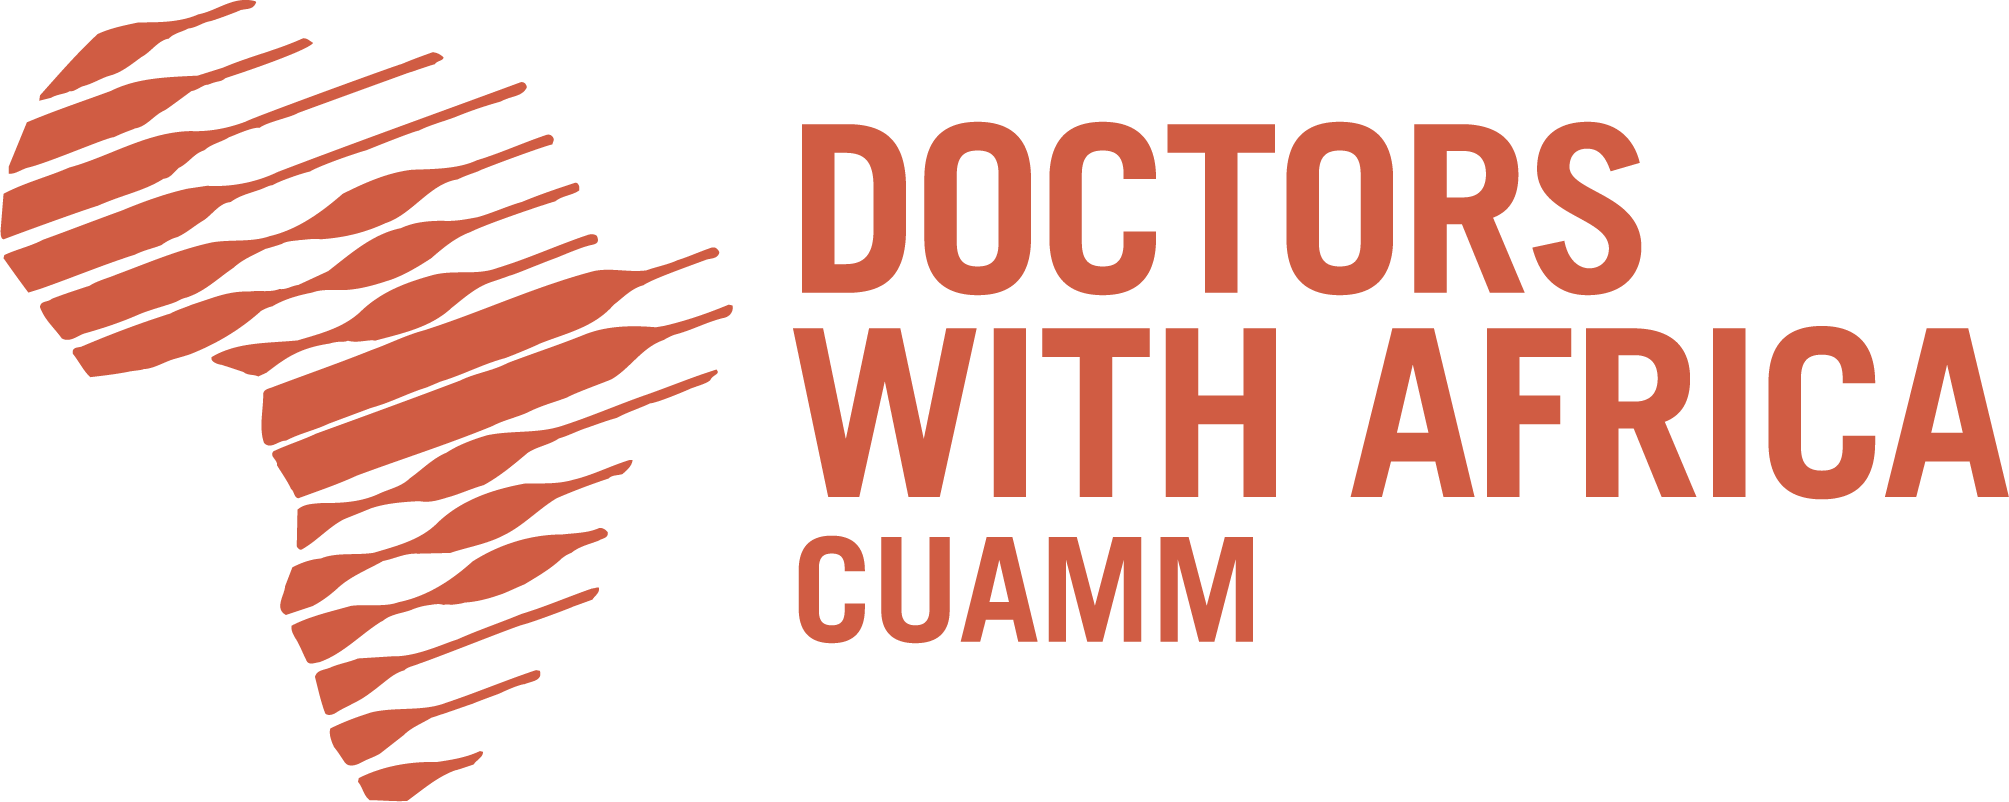 Doctors Logo - Home - Doctors with Africa CUAMM